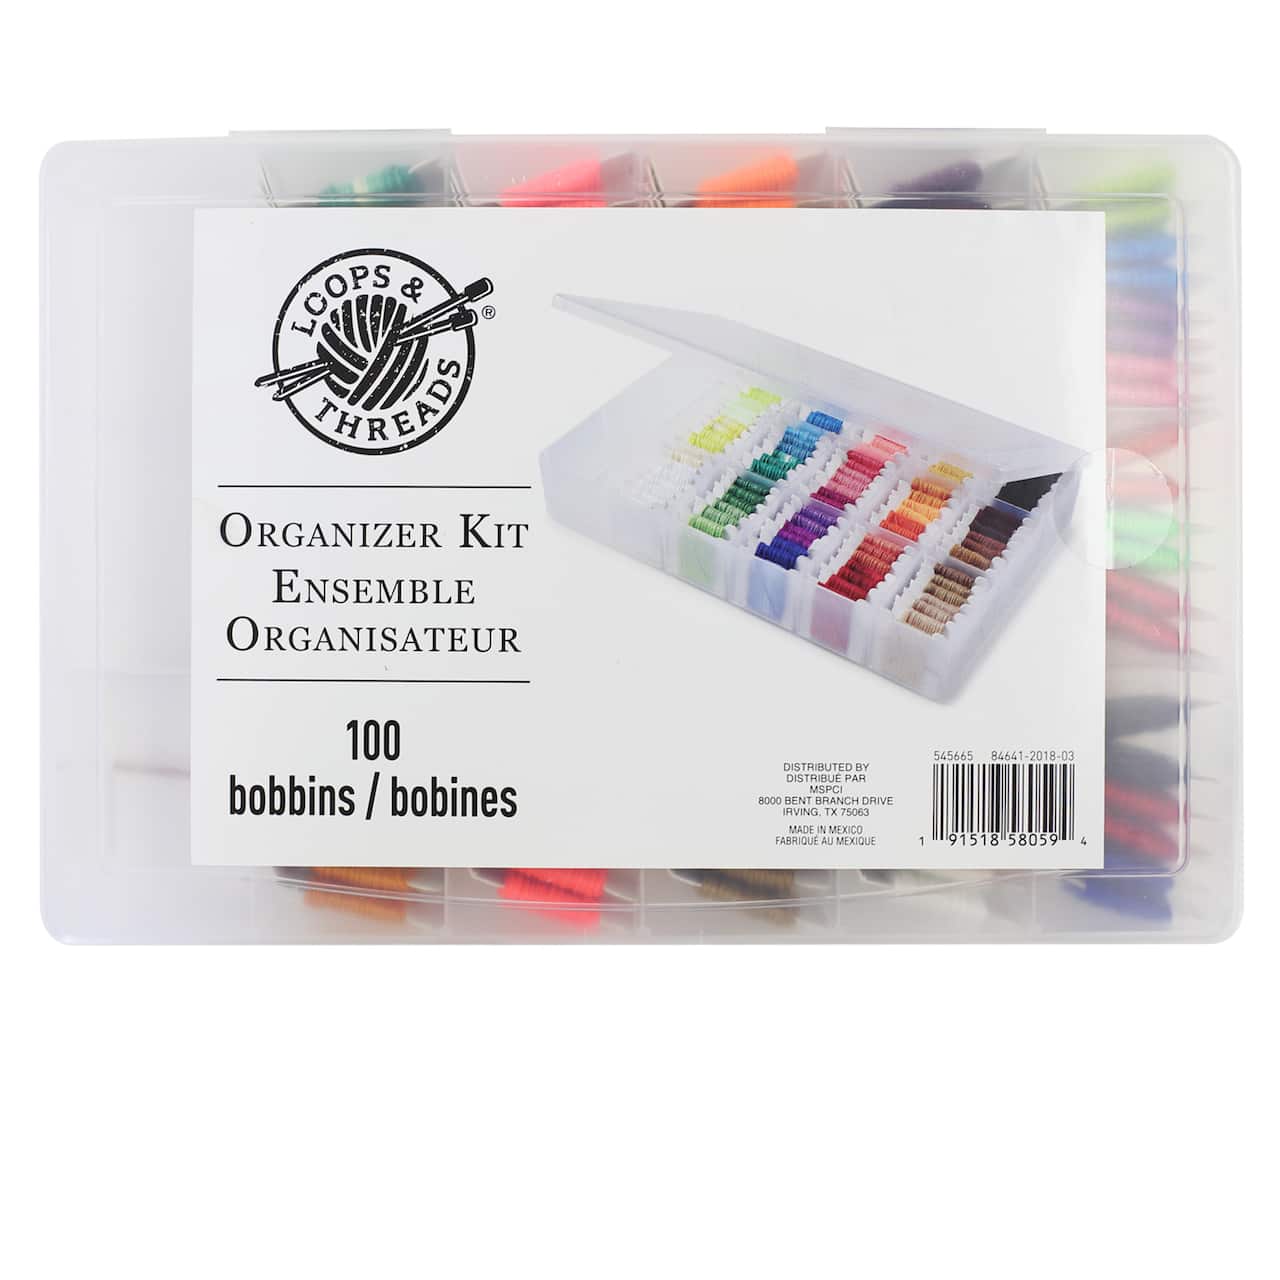 Embroidery Floss Organizer Kit By Loops & Threads®